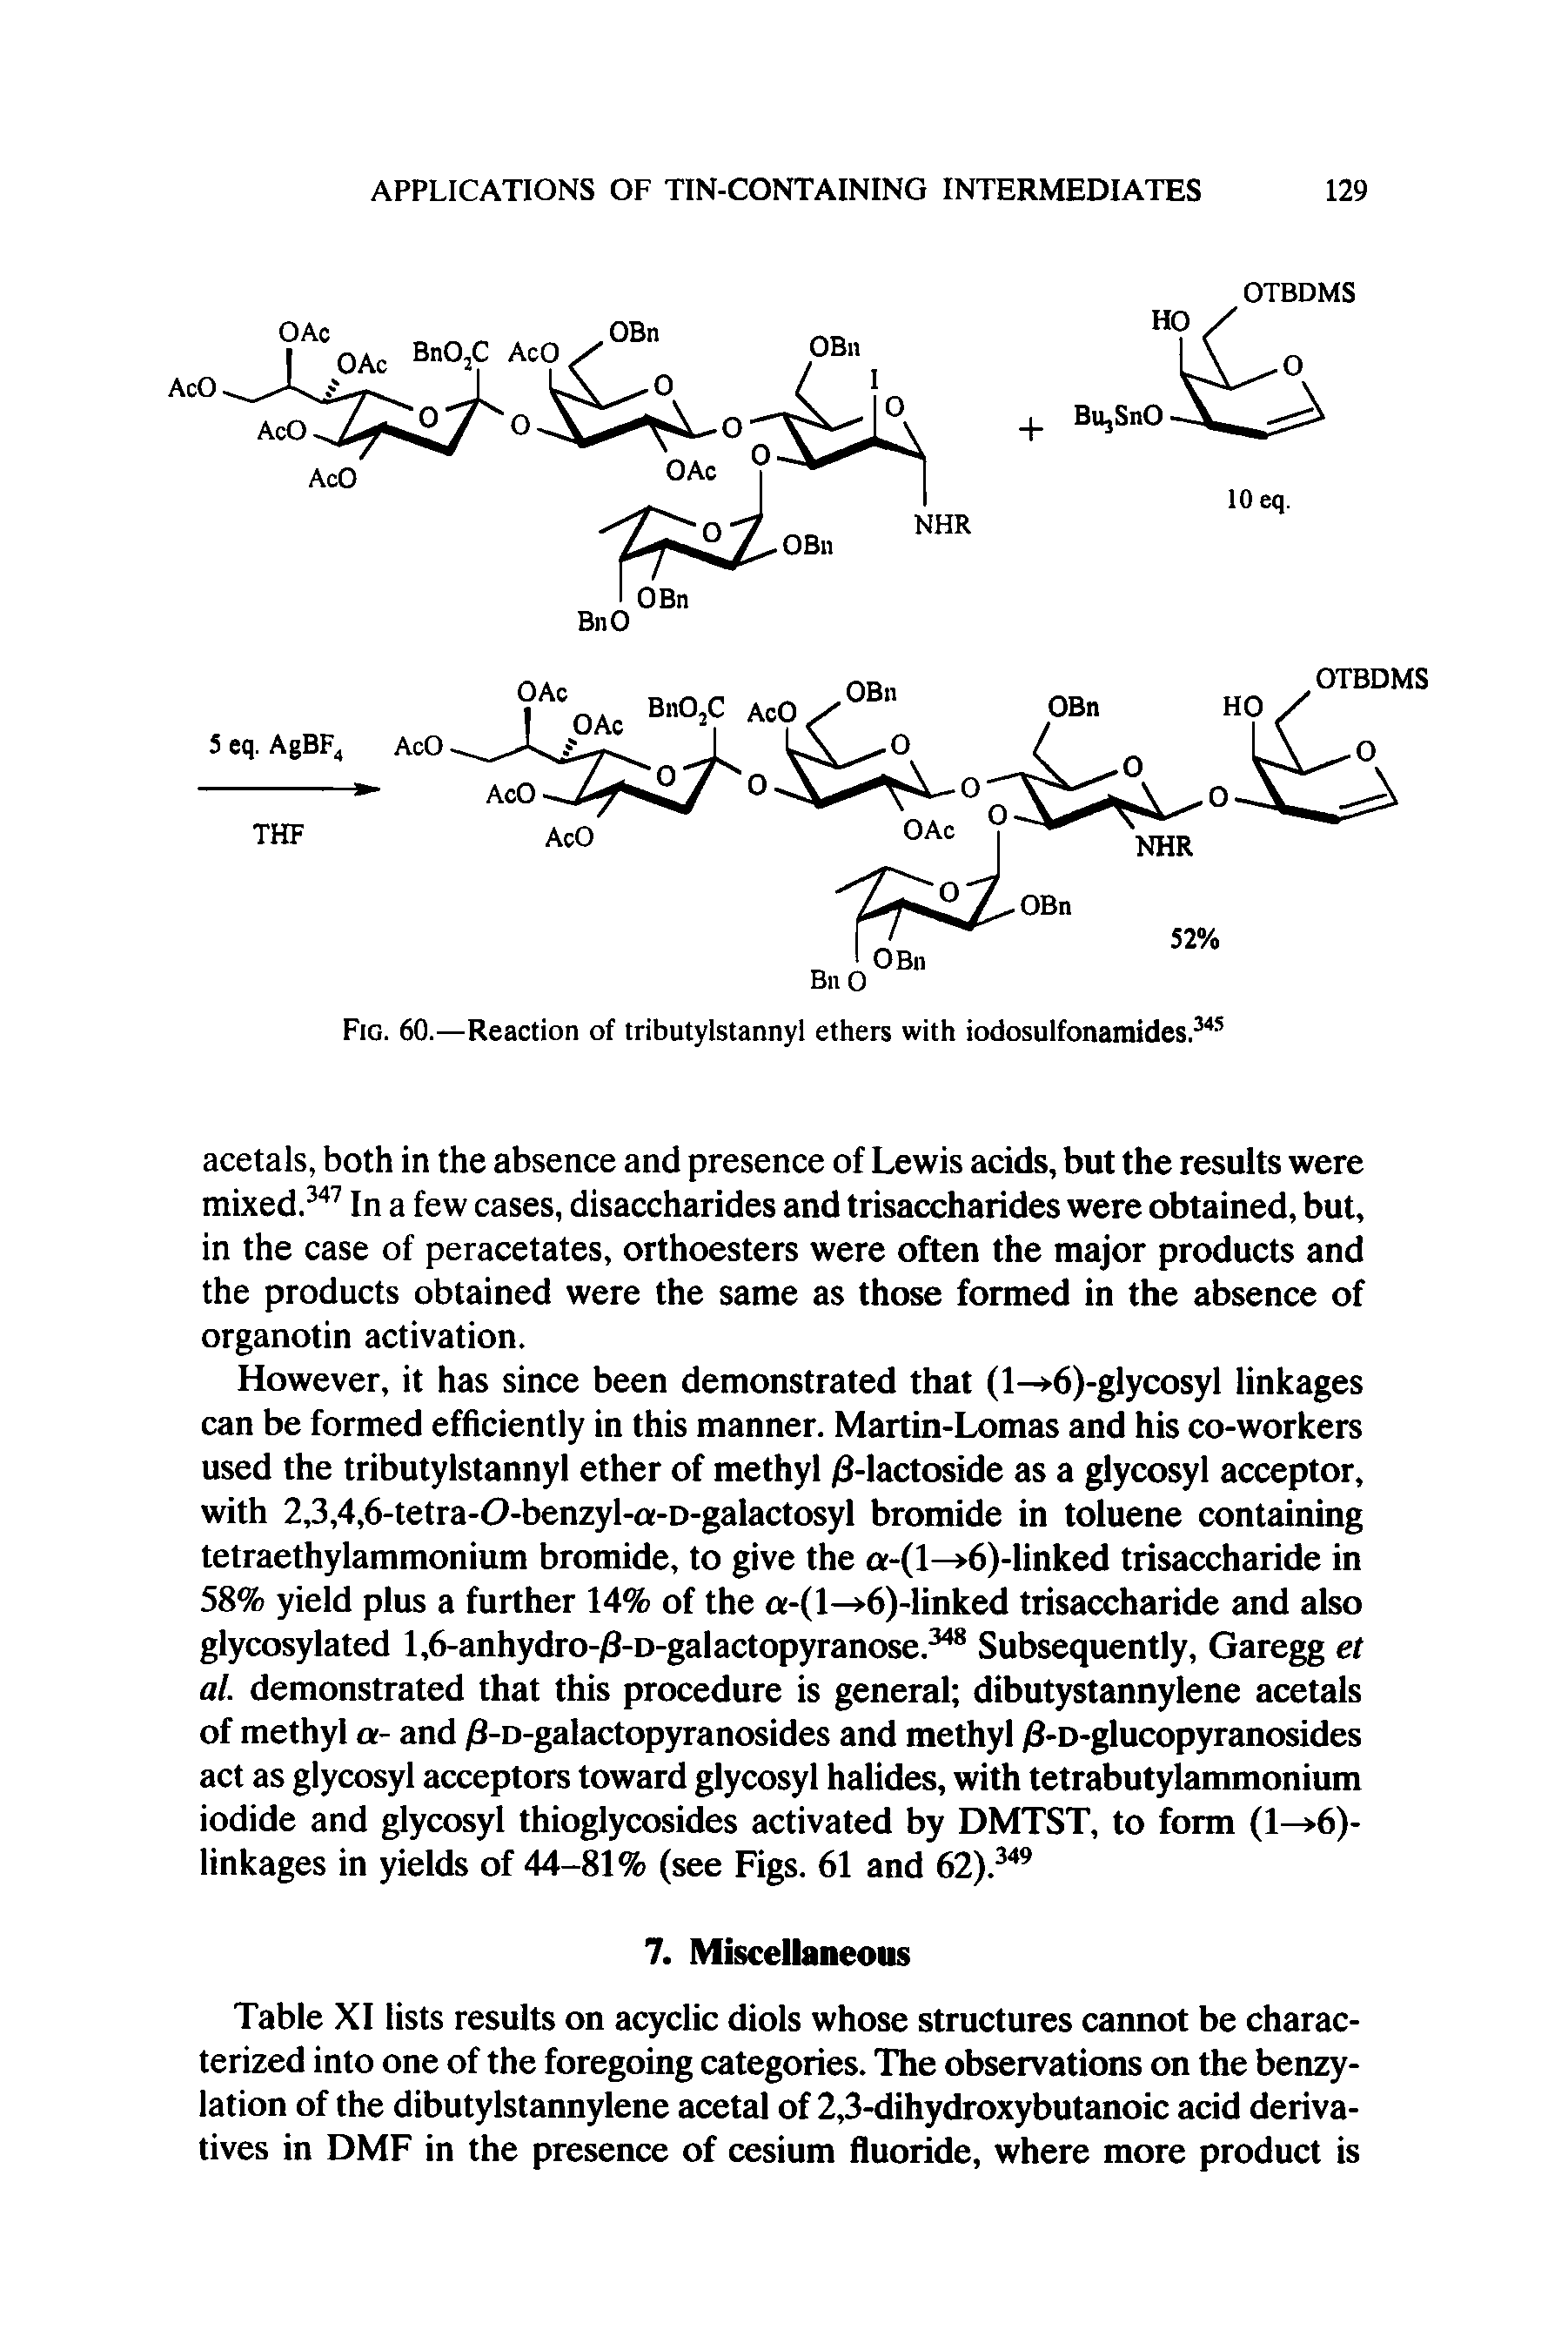 Table XI lists results on acyclic diols whose structures cannot be characterized into one of the foregoing categories. The observations on the benzy-lation of the dibutylstannylene acetal of 2,3-dihydroxybutanoic acid derivatives in DMF in the presence of cesium fluoride, where more product is...